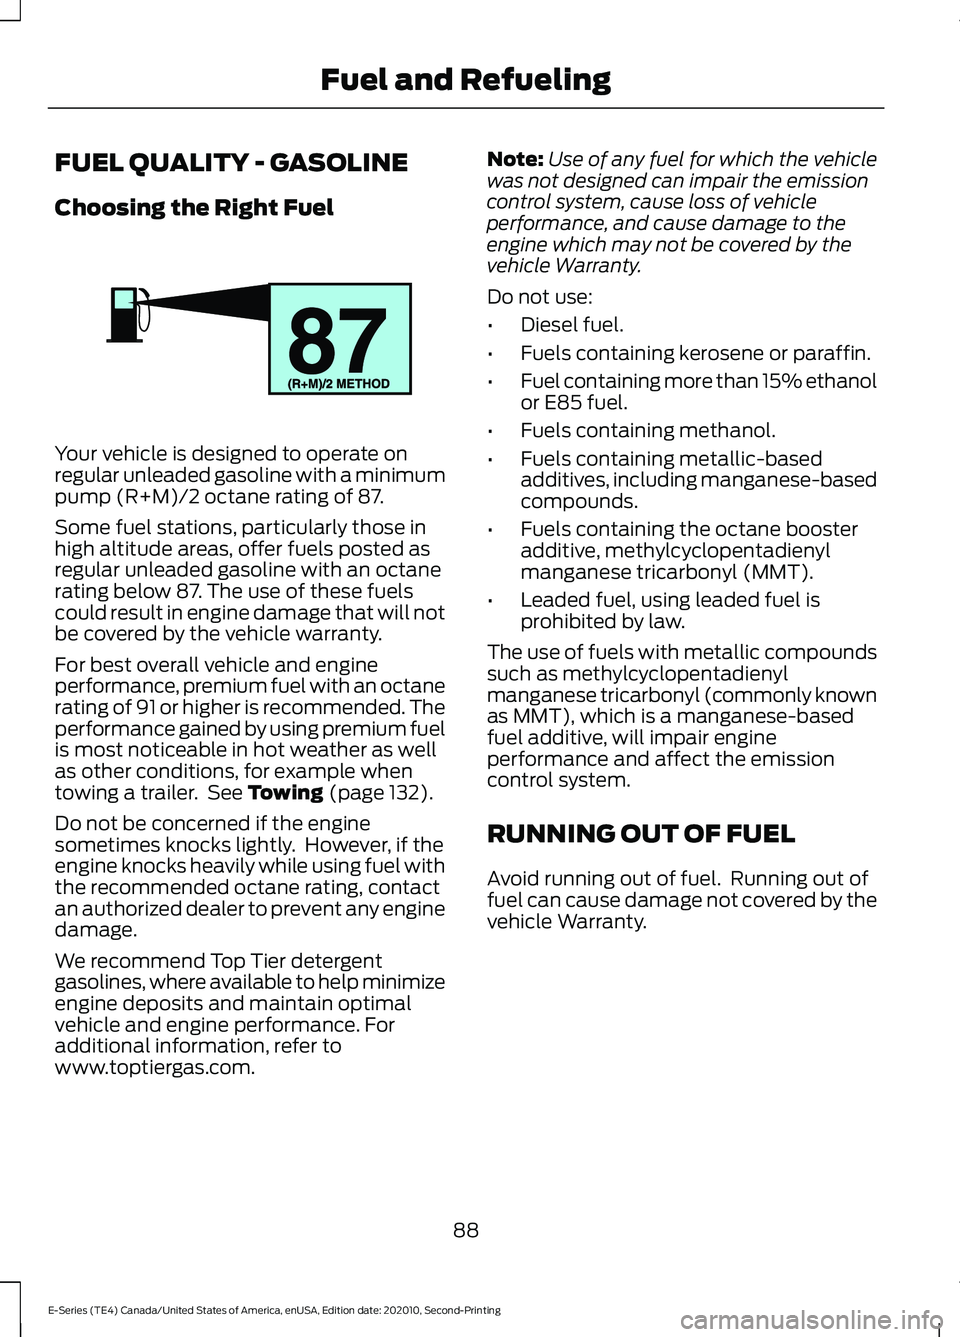 FORD E-450 2022  Owners Manual FUEL QUALITY - GASOLINE
Choosing the Right Fuel
Your vehicle is designed to operate on
regular unleaded gasoline with a minimum
pump (R+M)/2 octane rating of 87.
Some fuel stations, particularly those